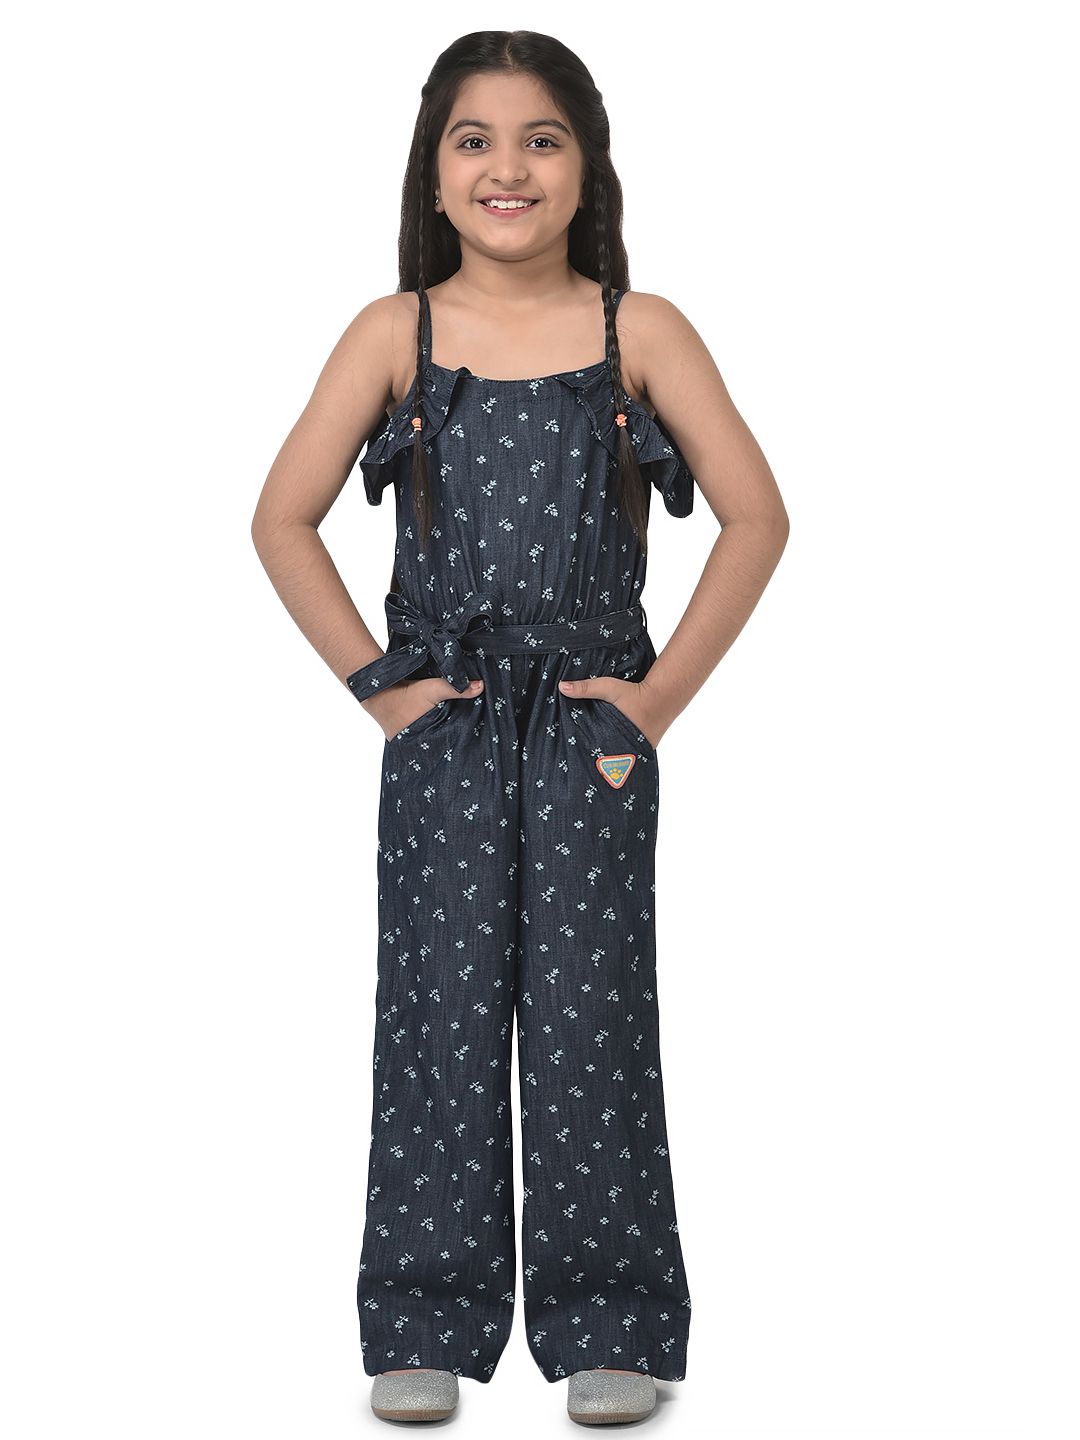 Share 77+ jumpsuits for 11 year olds super hot